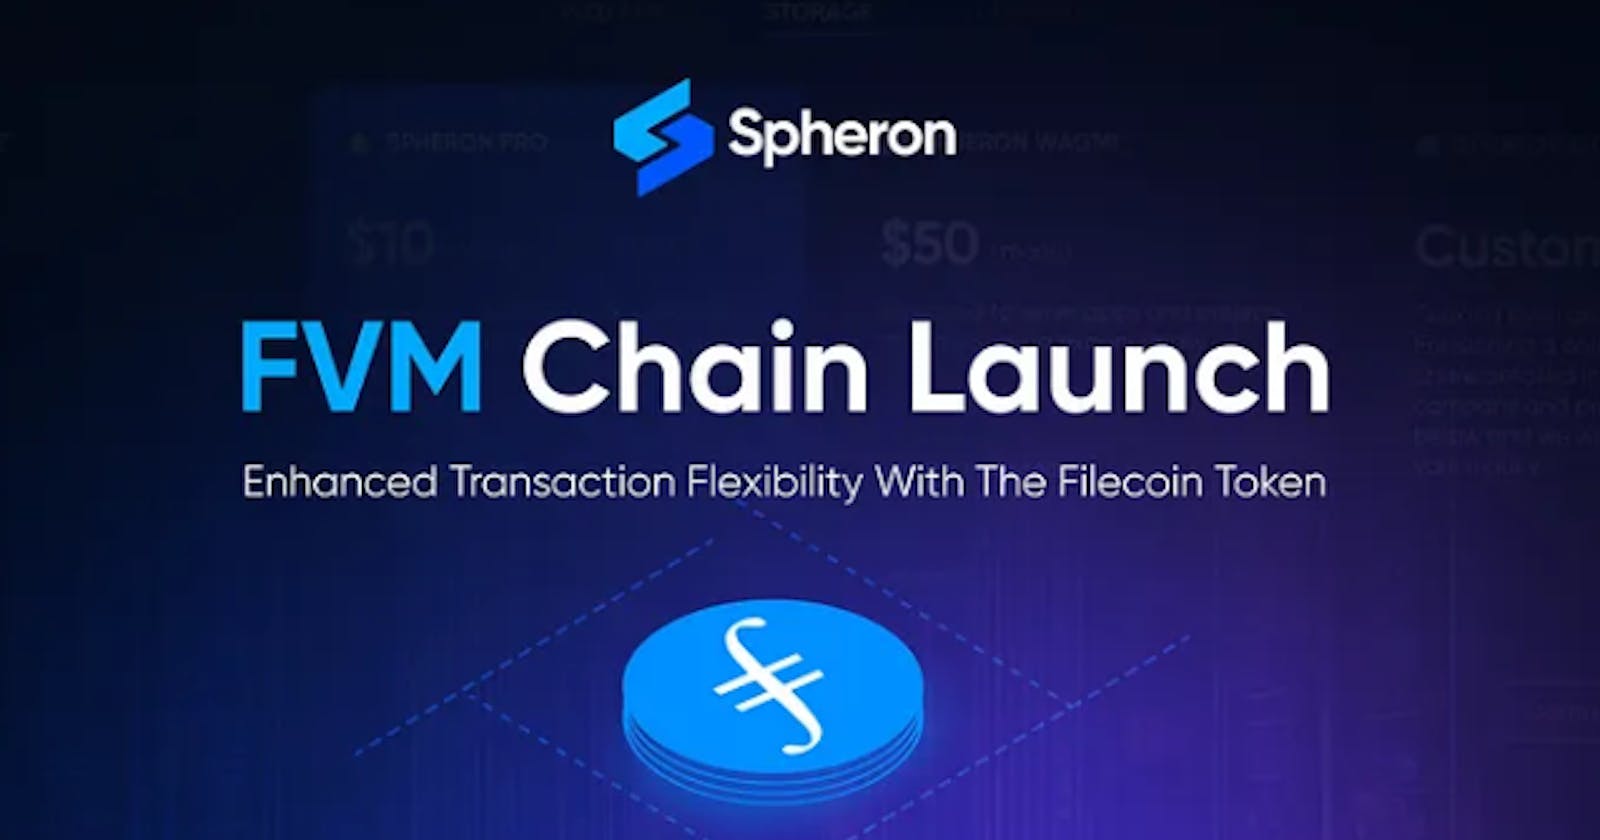 "From Storage to Transactions"-Spheron Integrates Filecoin (FIL) as a Native Payment Method